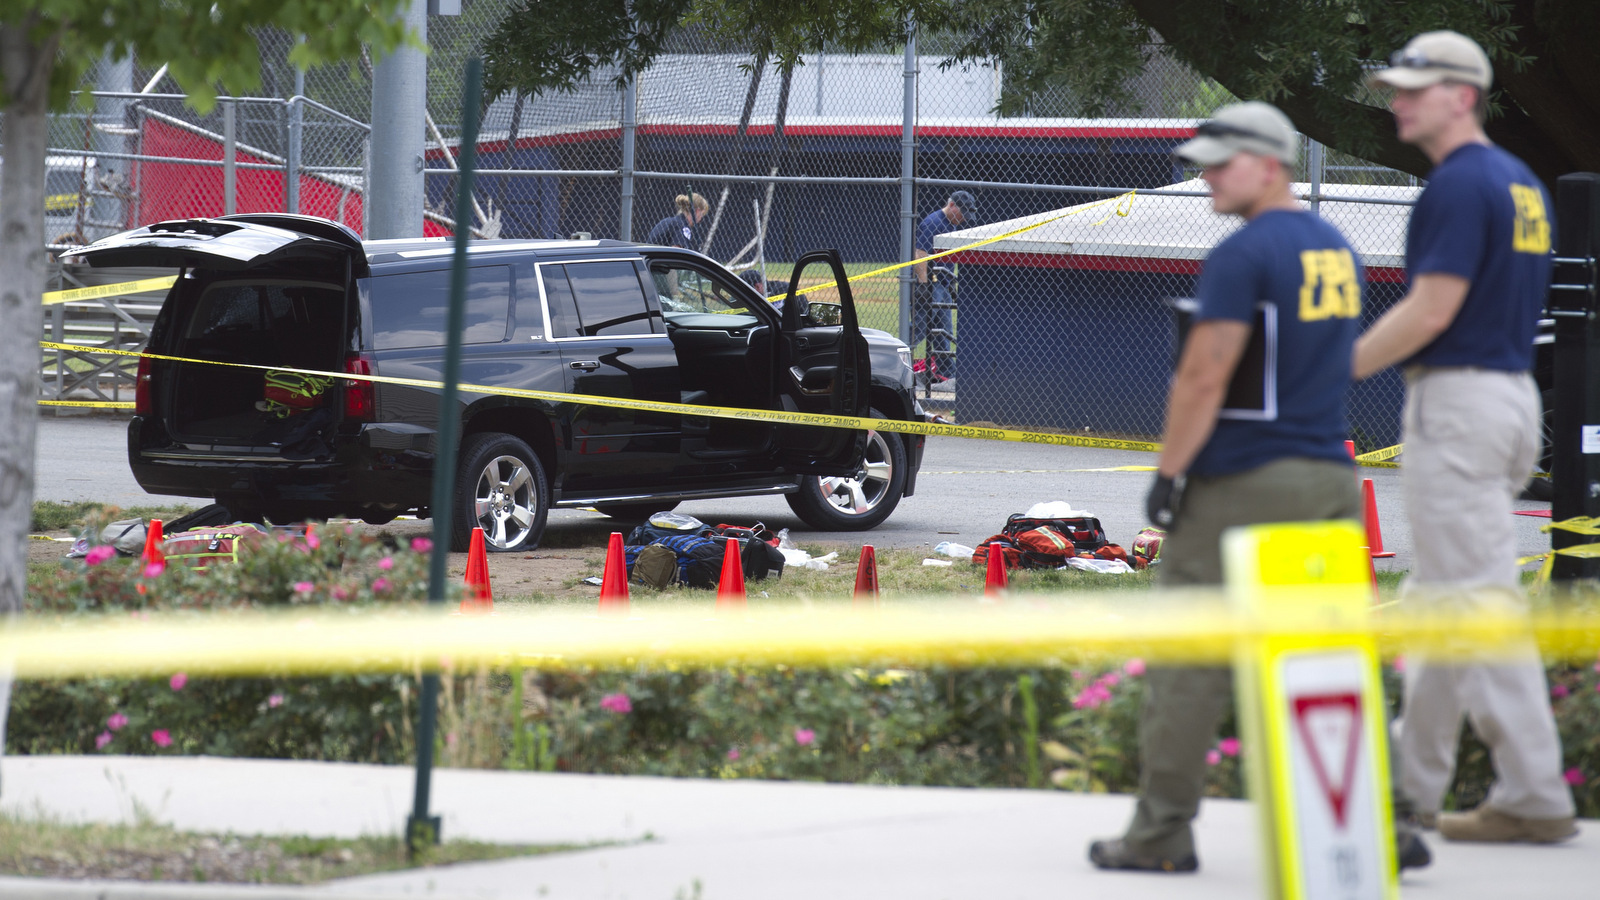 An SUV, with a bullet hole in the windshield and a flat tire, sits in the parking lot at the scene of a multiple shooting in Alexandria, Va.,, June 14, 2017, during a congressional baseball practice. (AP/Cliff Owen)